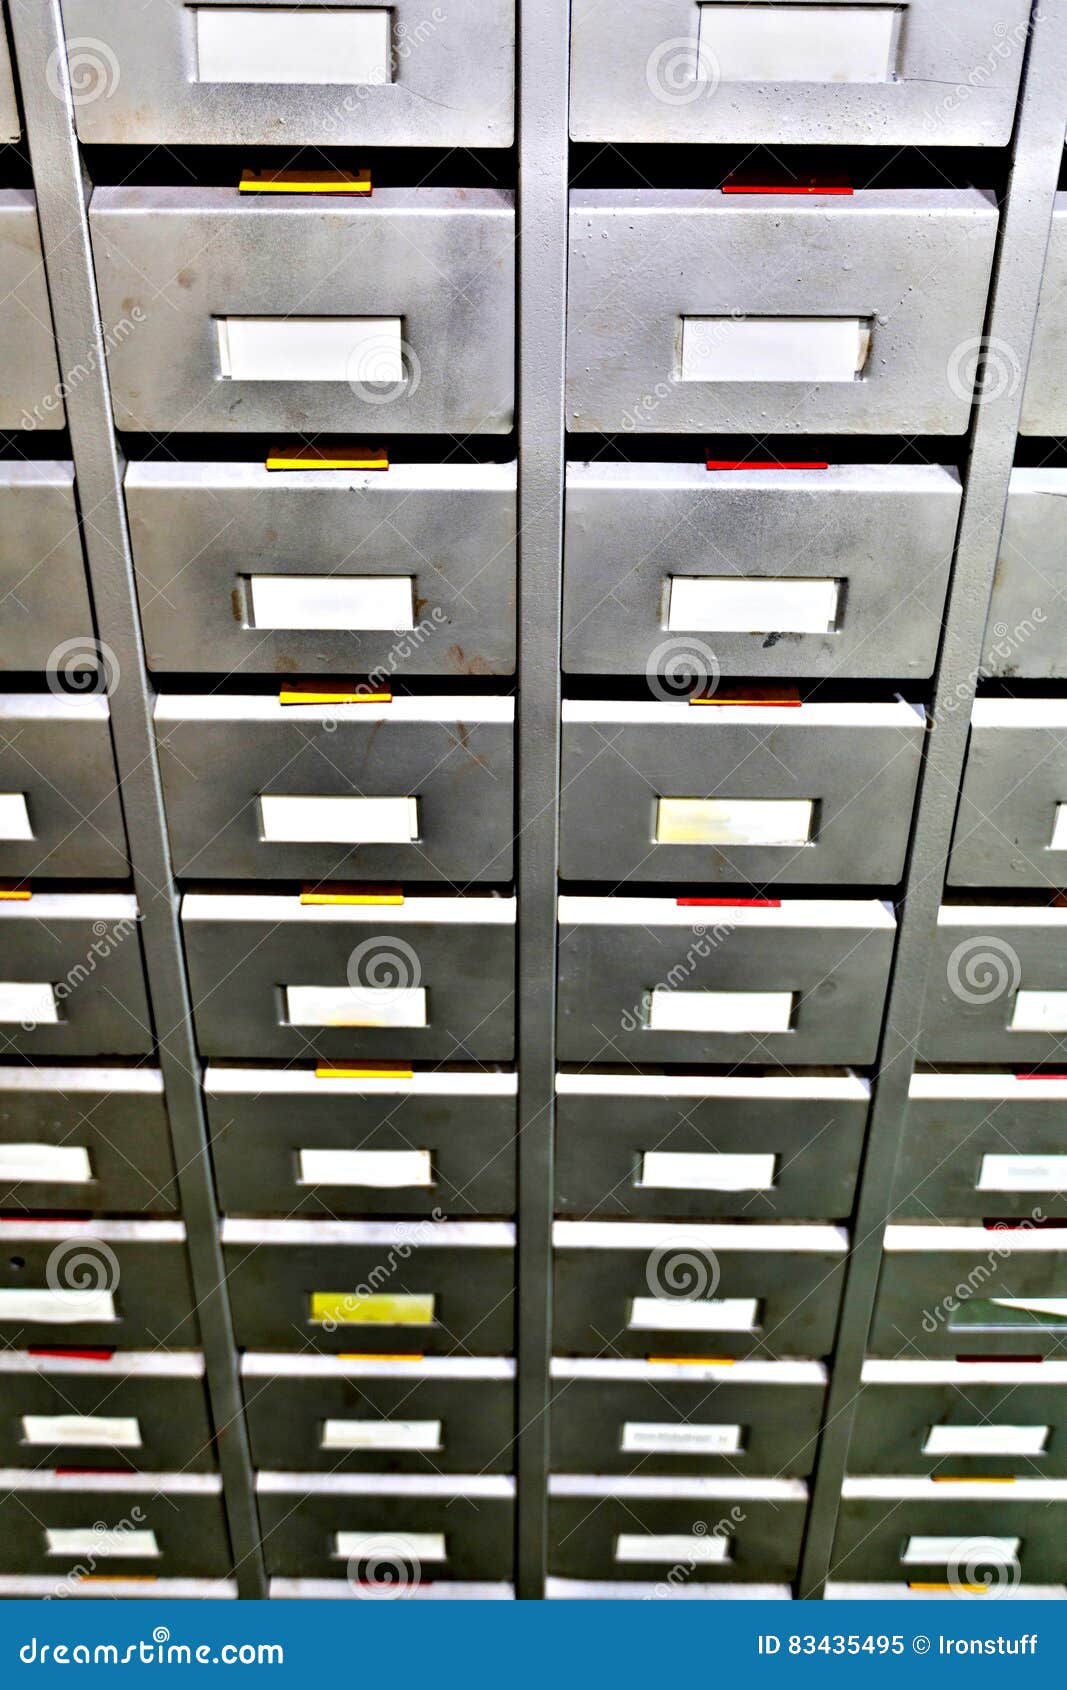 Metal Filing Boxes For Spare Parts Stock Image Image Of Parts